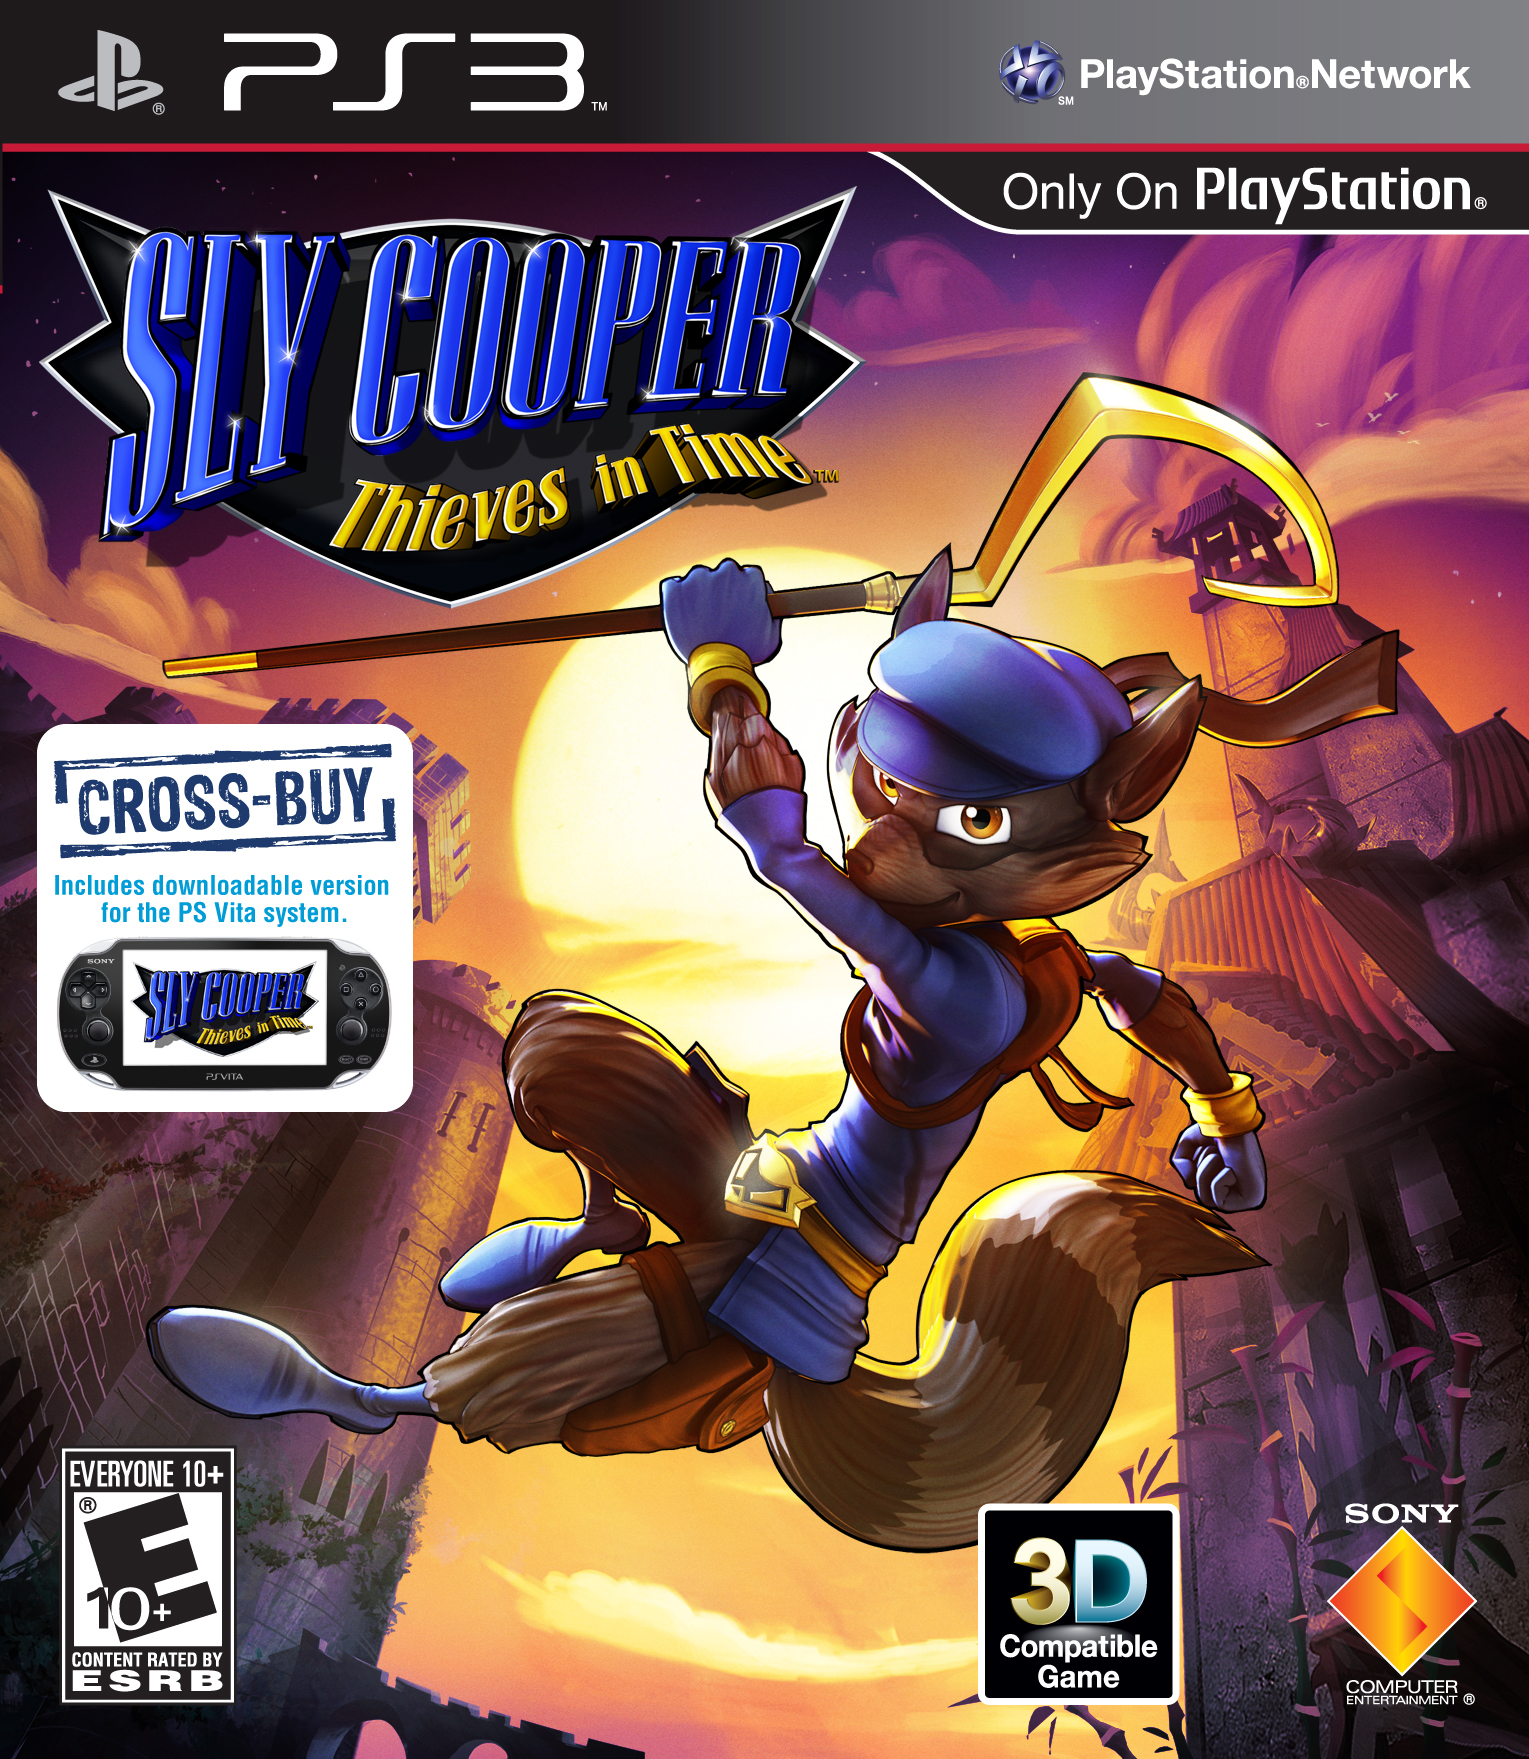 Sly Cooper: Thieves In Time [PS Vita Cross Buy], Sony, PlayStation 3, 711719982470 - image 1 of 41